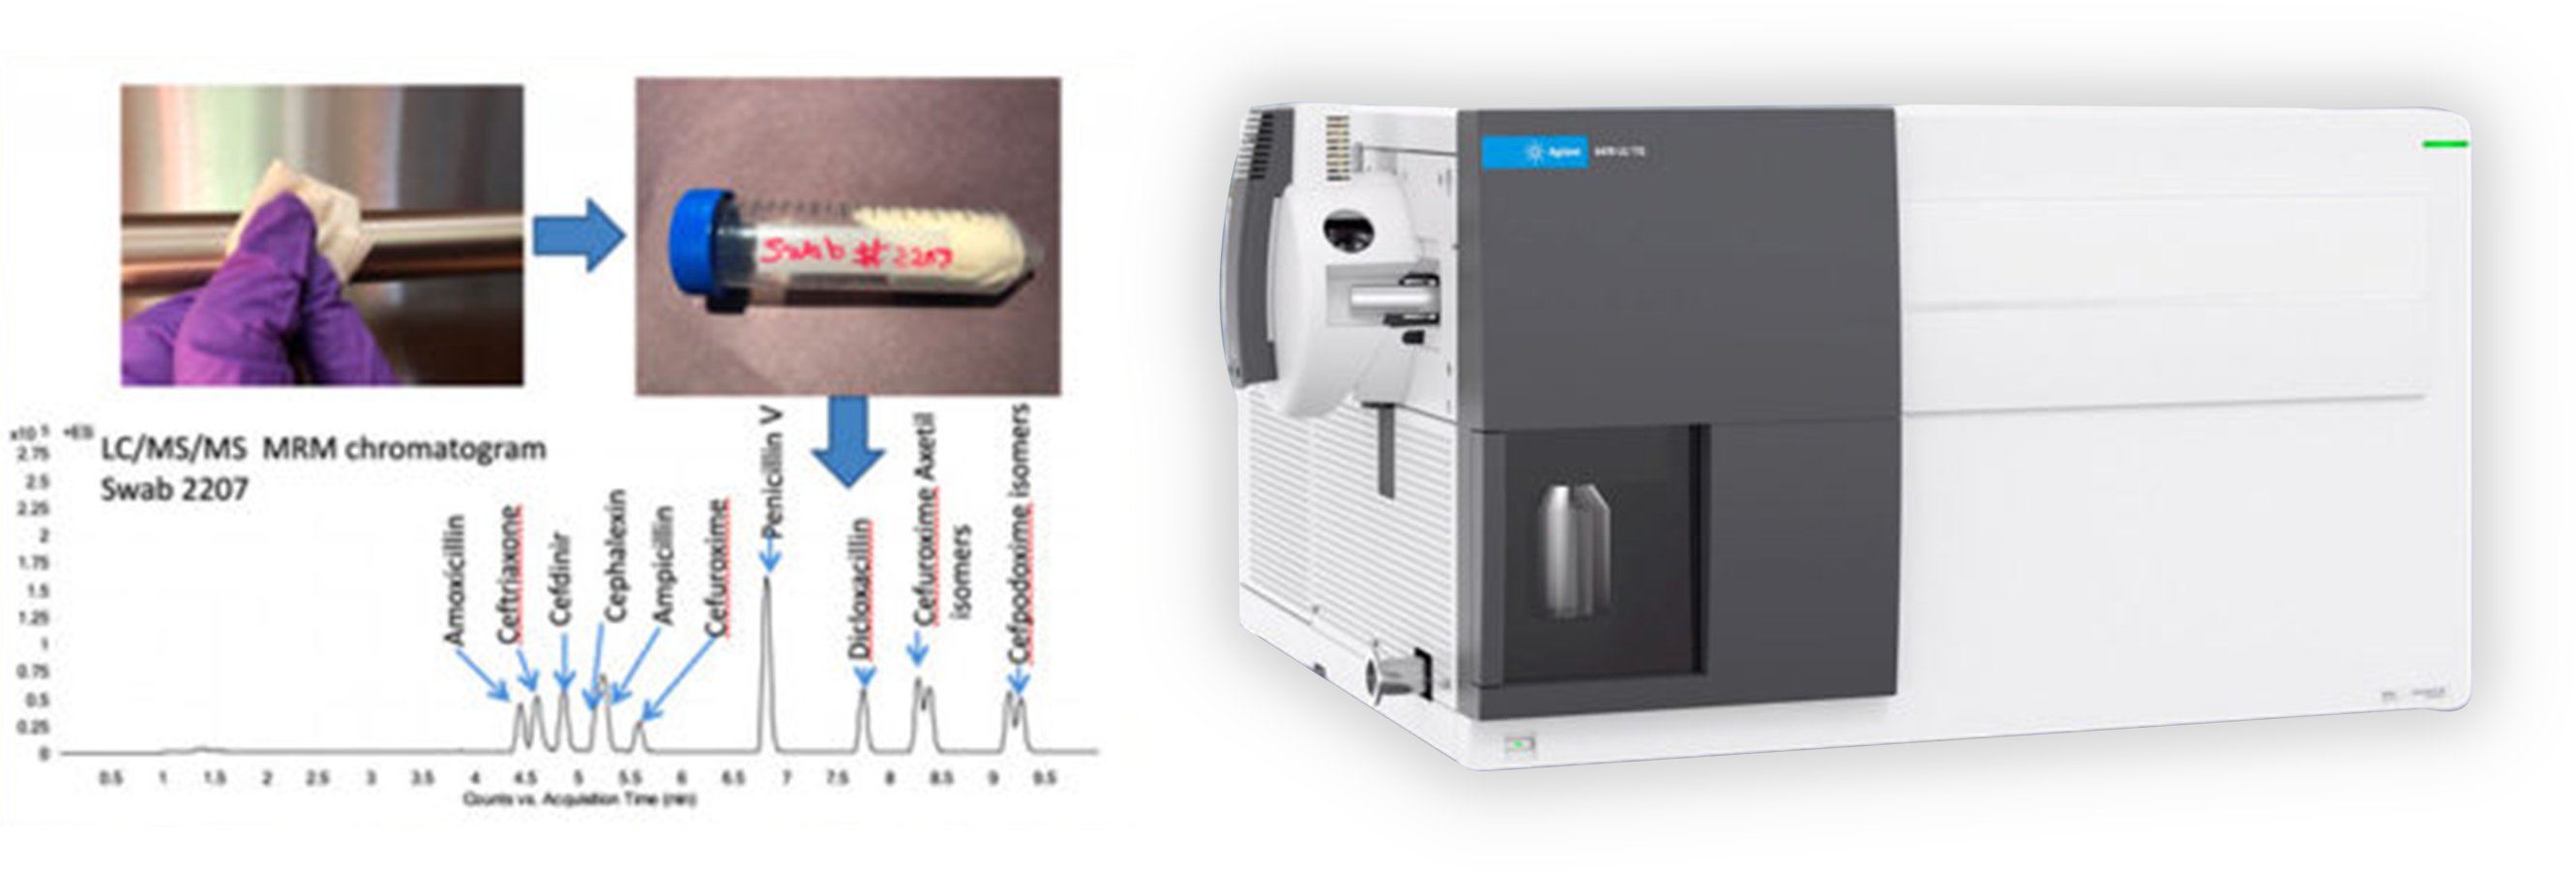 Swabbing LC/MS/MS approach is used to detect pharmaceutical products and food allergens